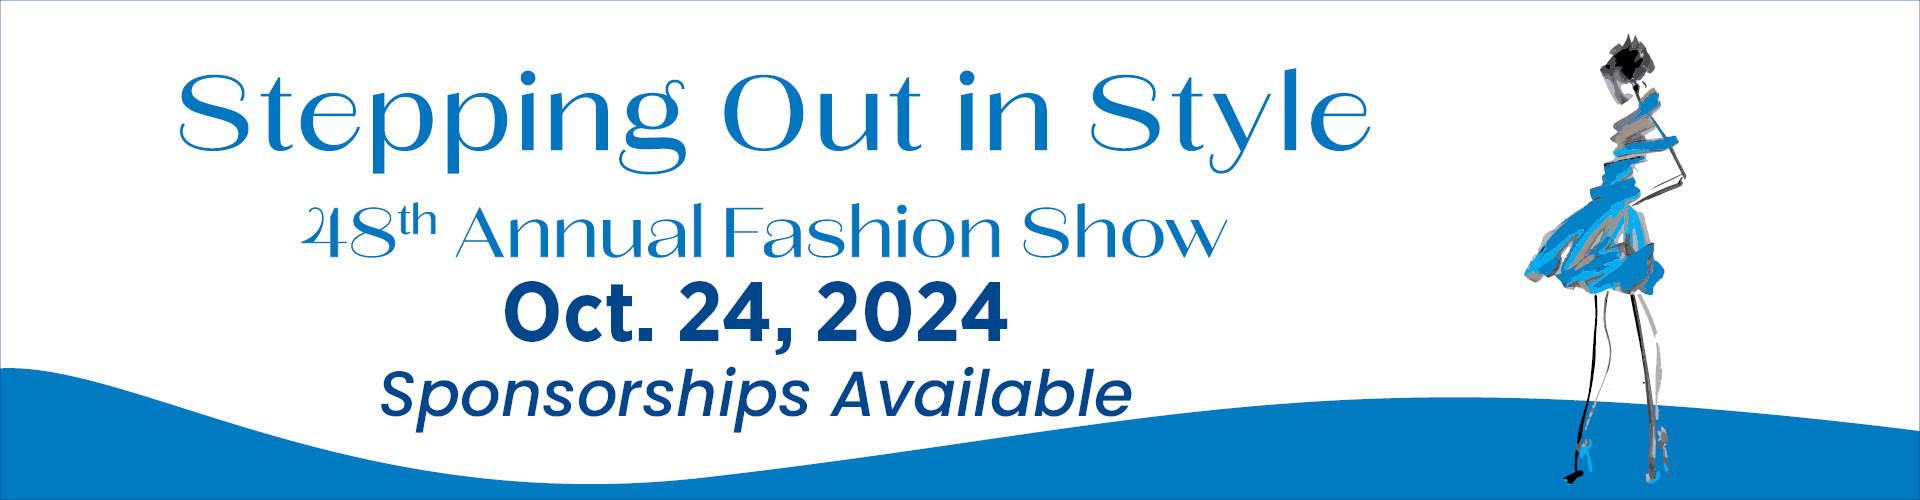 Drawn image of a women model in blue dress with Graphic text reading Stepping out in style 48th annual Fashion show Thursday, Oct. 24. Sponsorships available